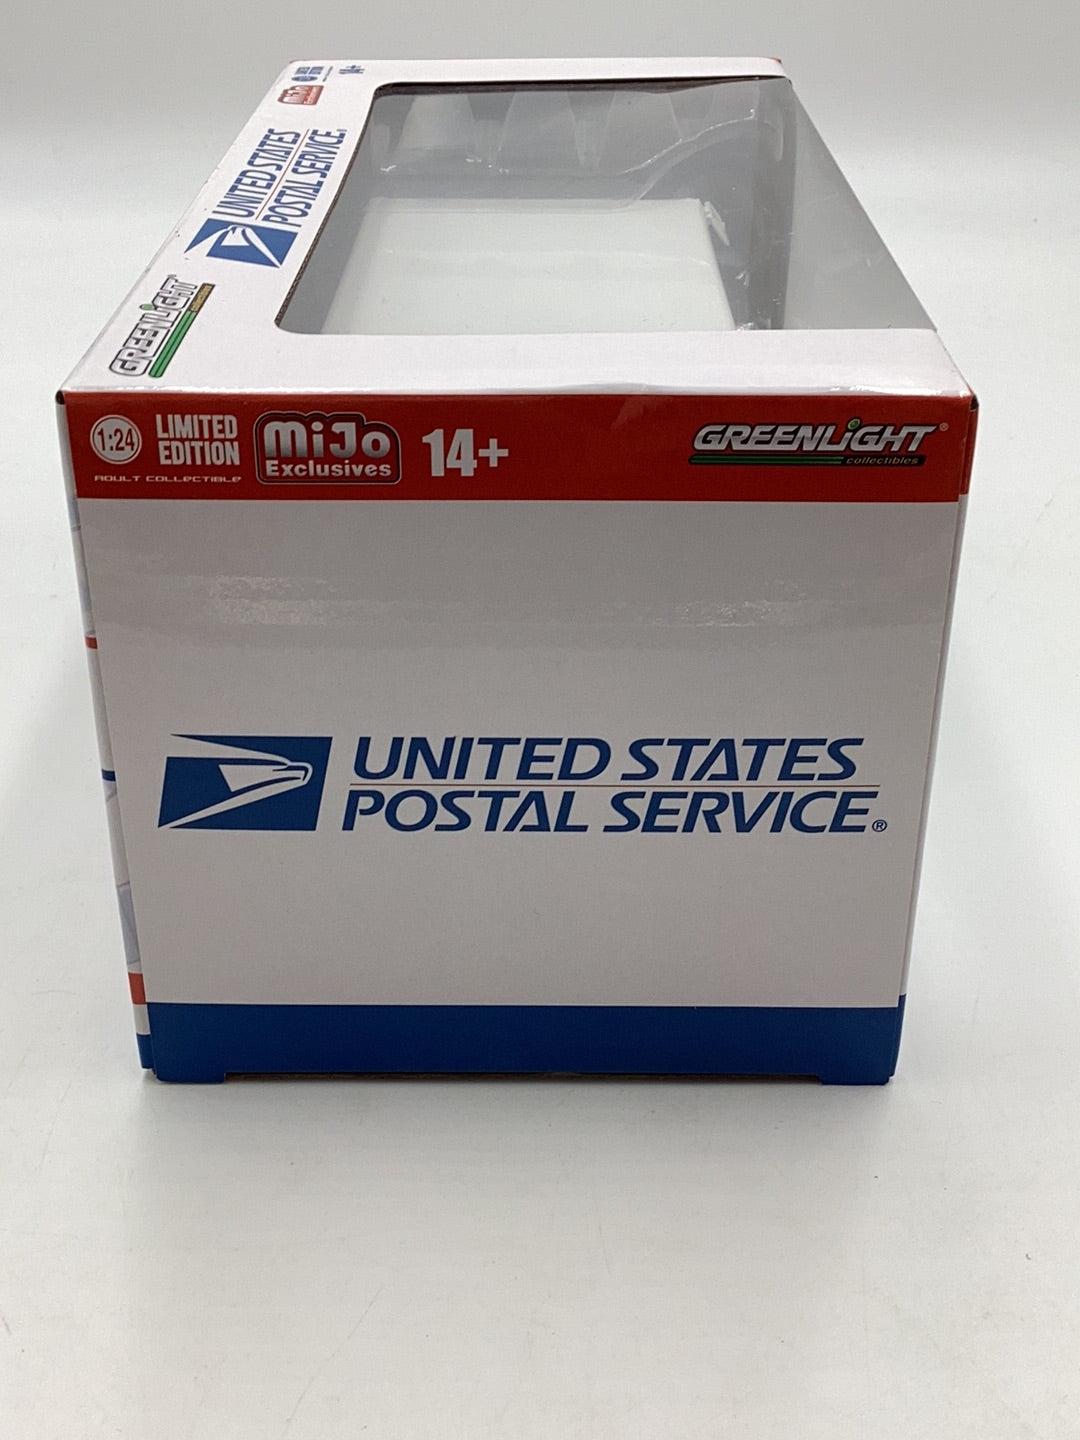 Greenlight 1/24 USPS Long Life Delivery Vehicle United States Postal Service MiJo Exclusives